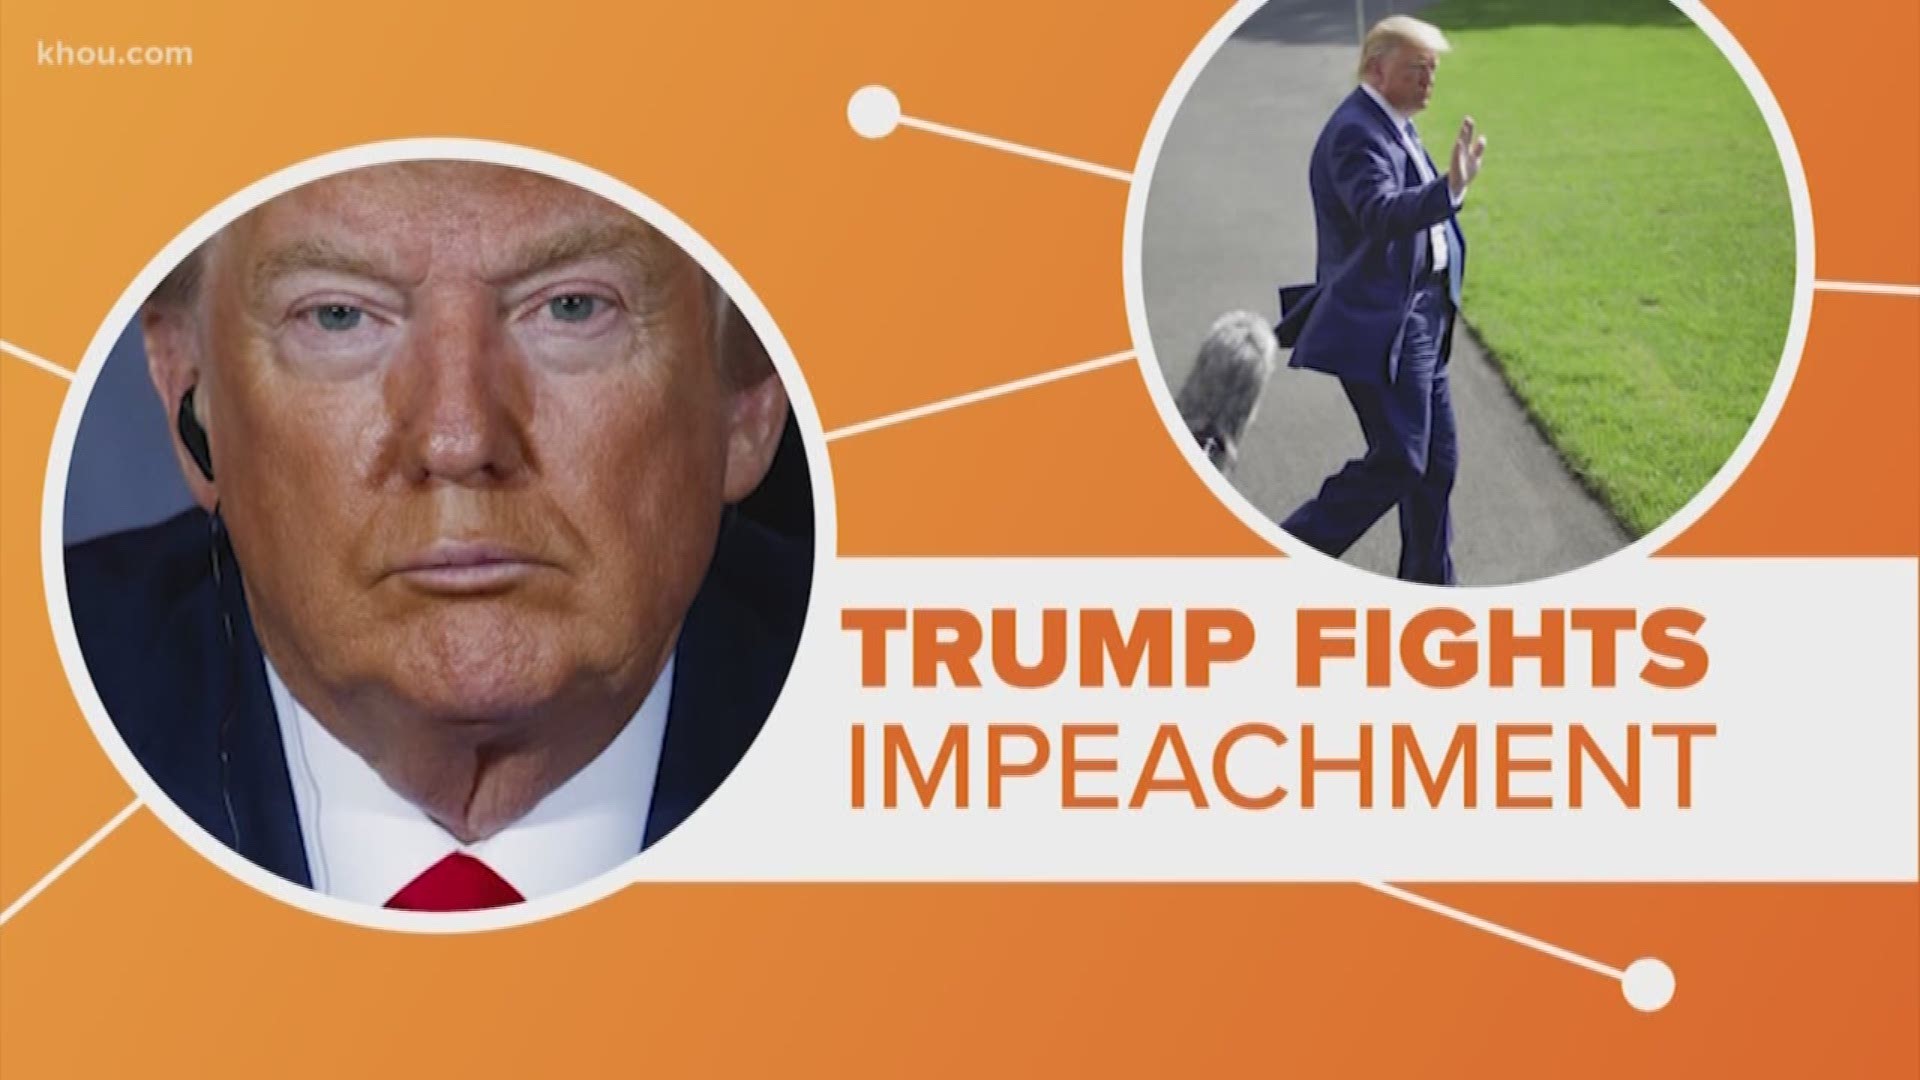 President Trump is defending himself on several platforms from the Democrats impeachment inquiry. And that includes one of his favorite platforms – social media.